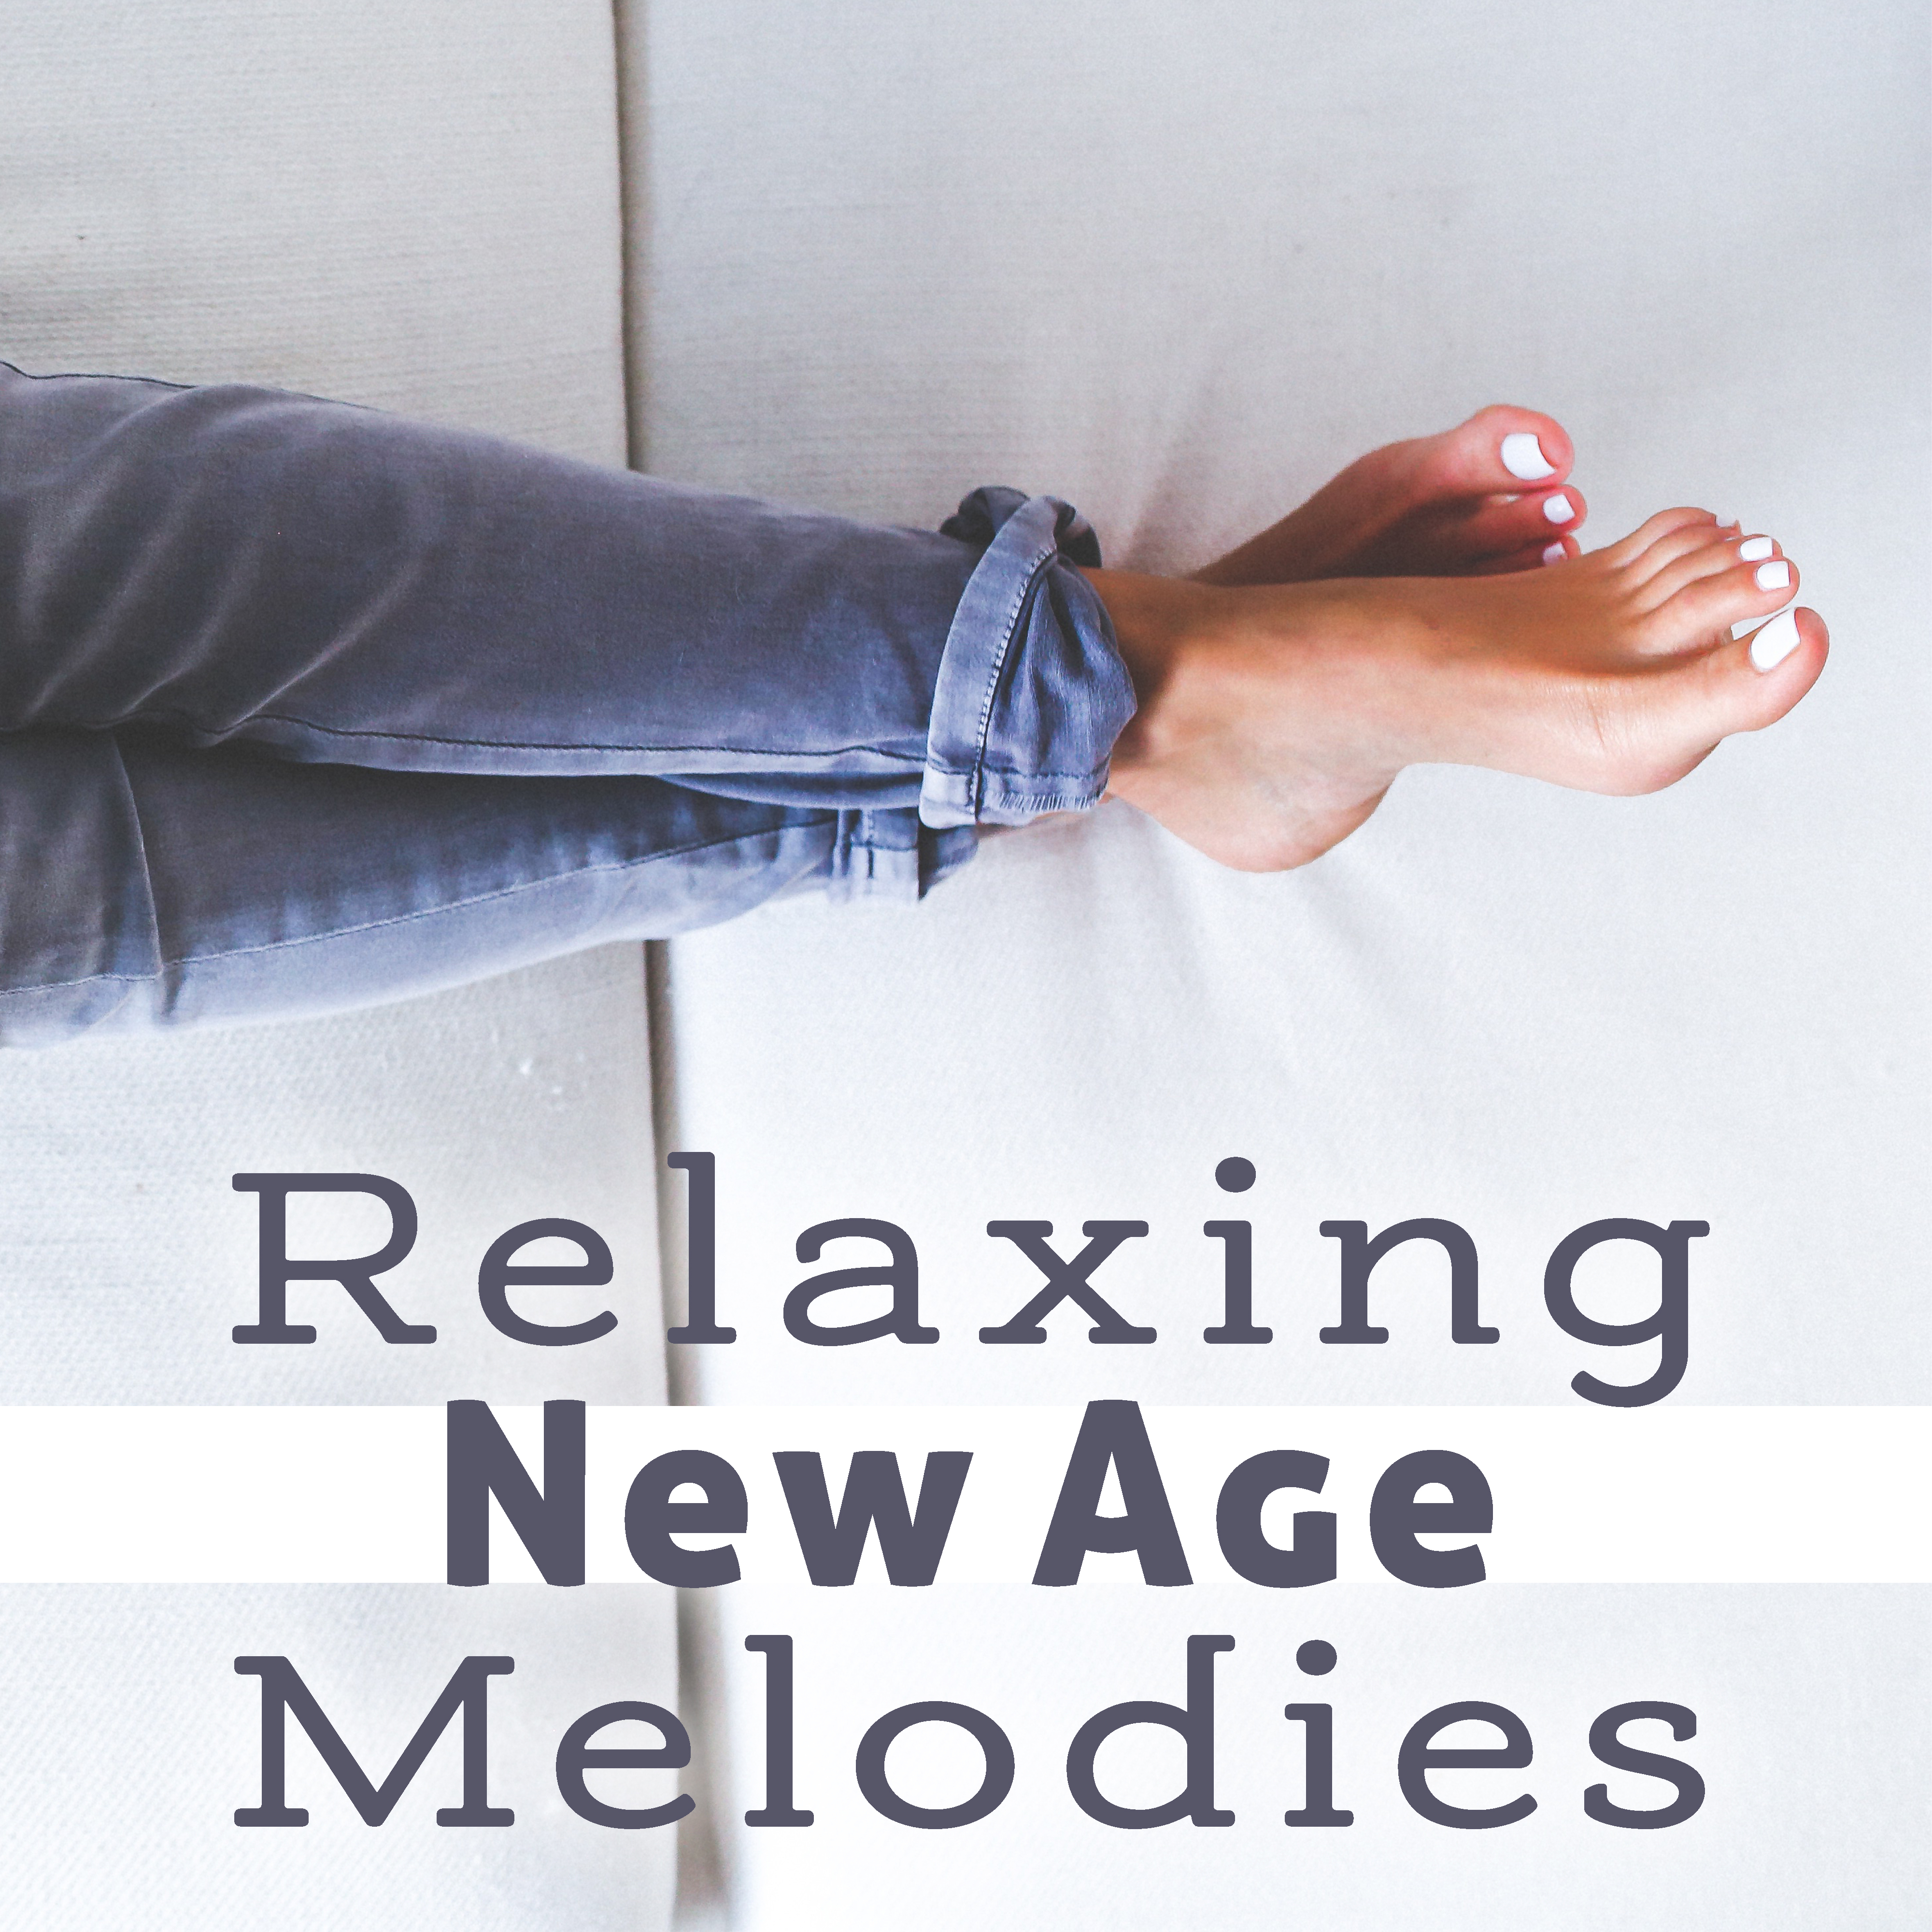 Relaxing New Age Melodies – Calm Sounds to Relax, Peaceful Music, Rest a Bit